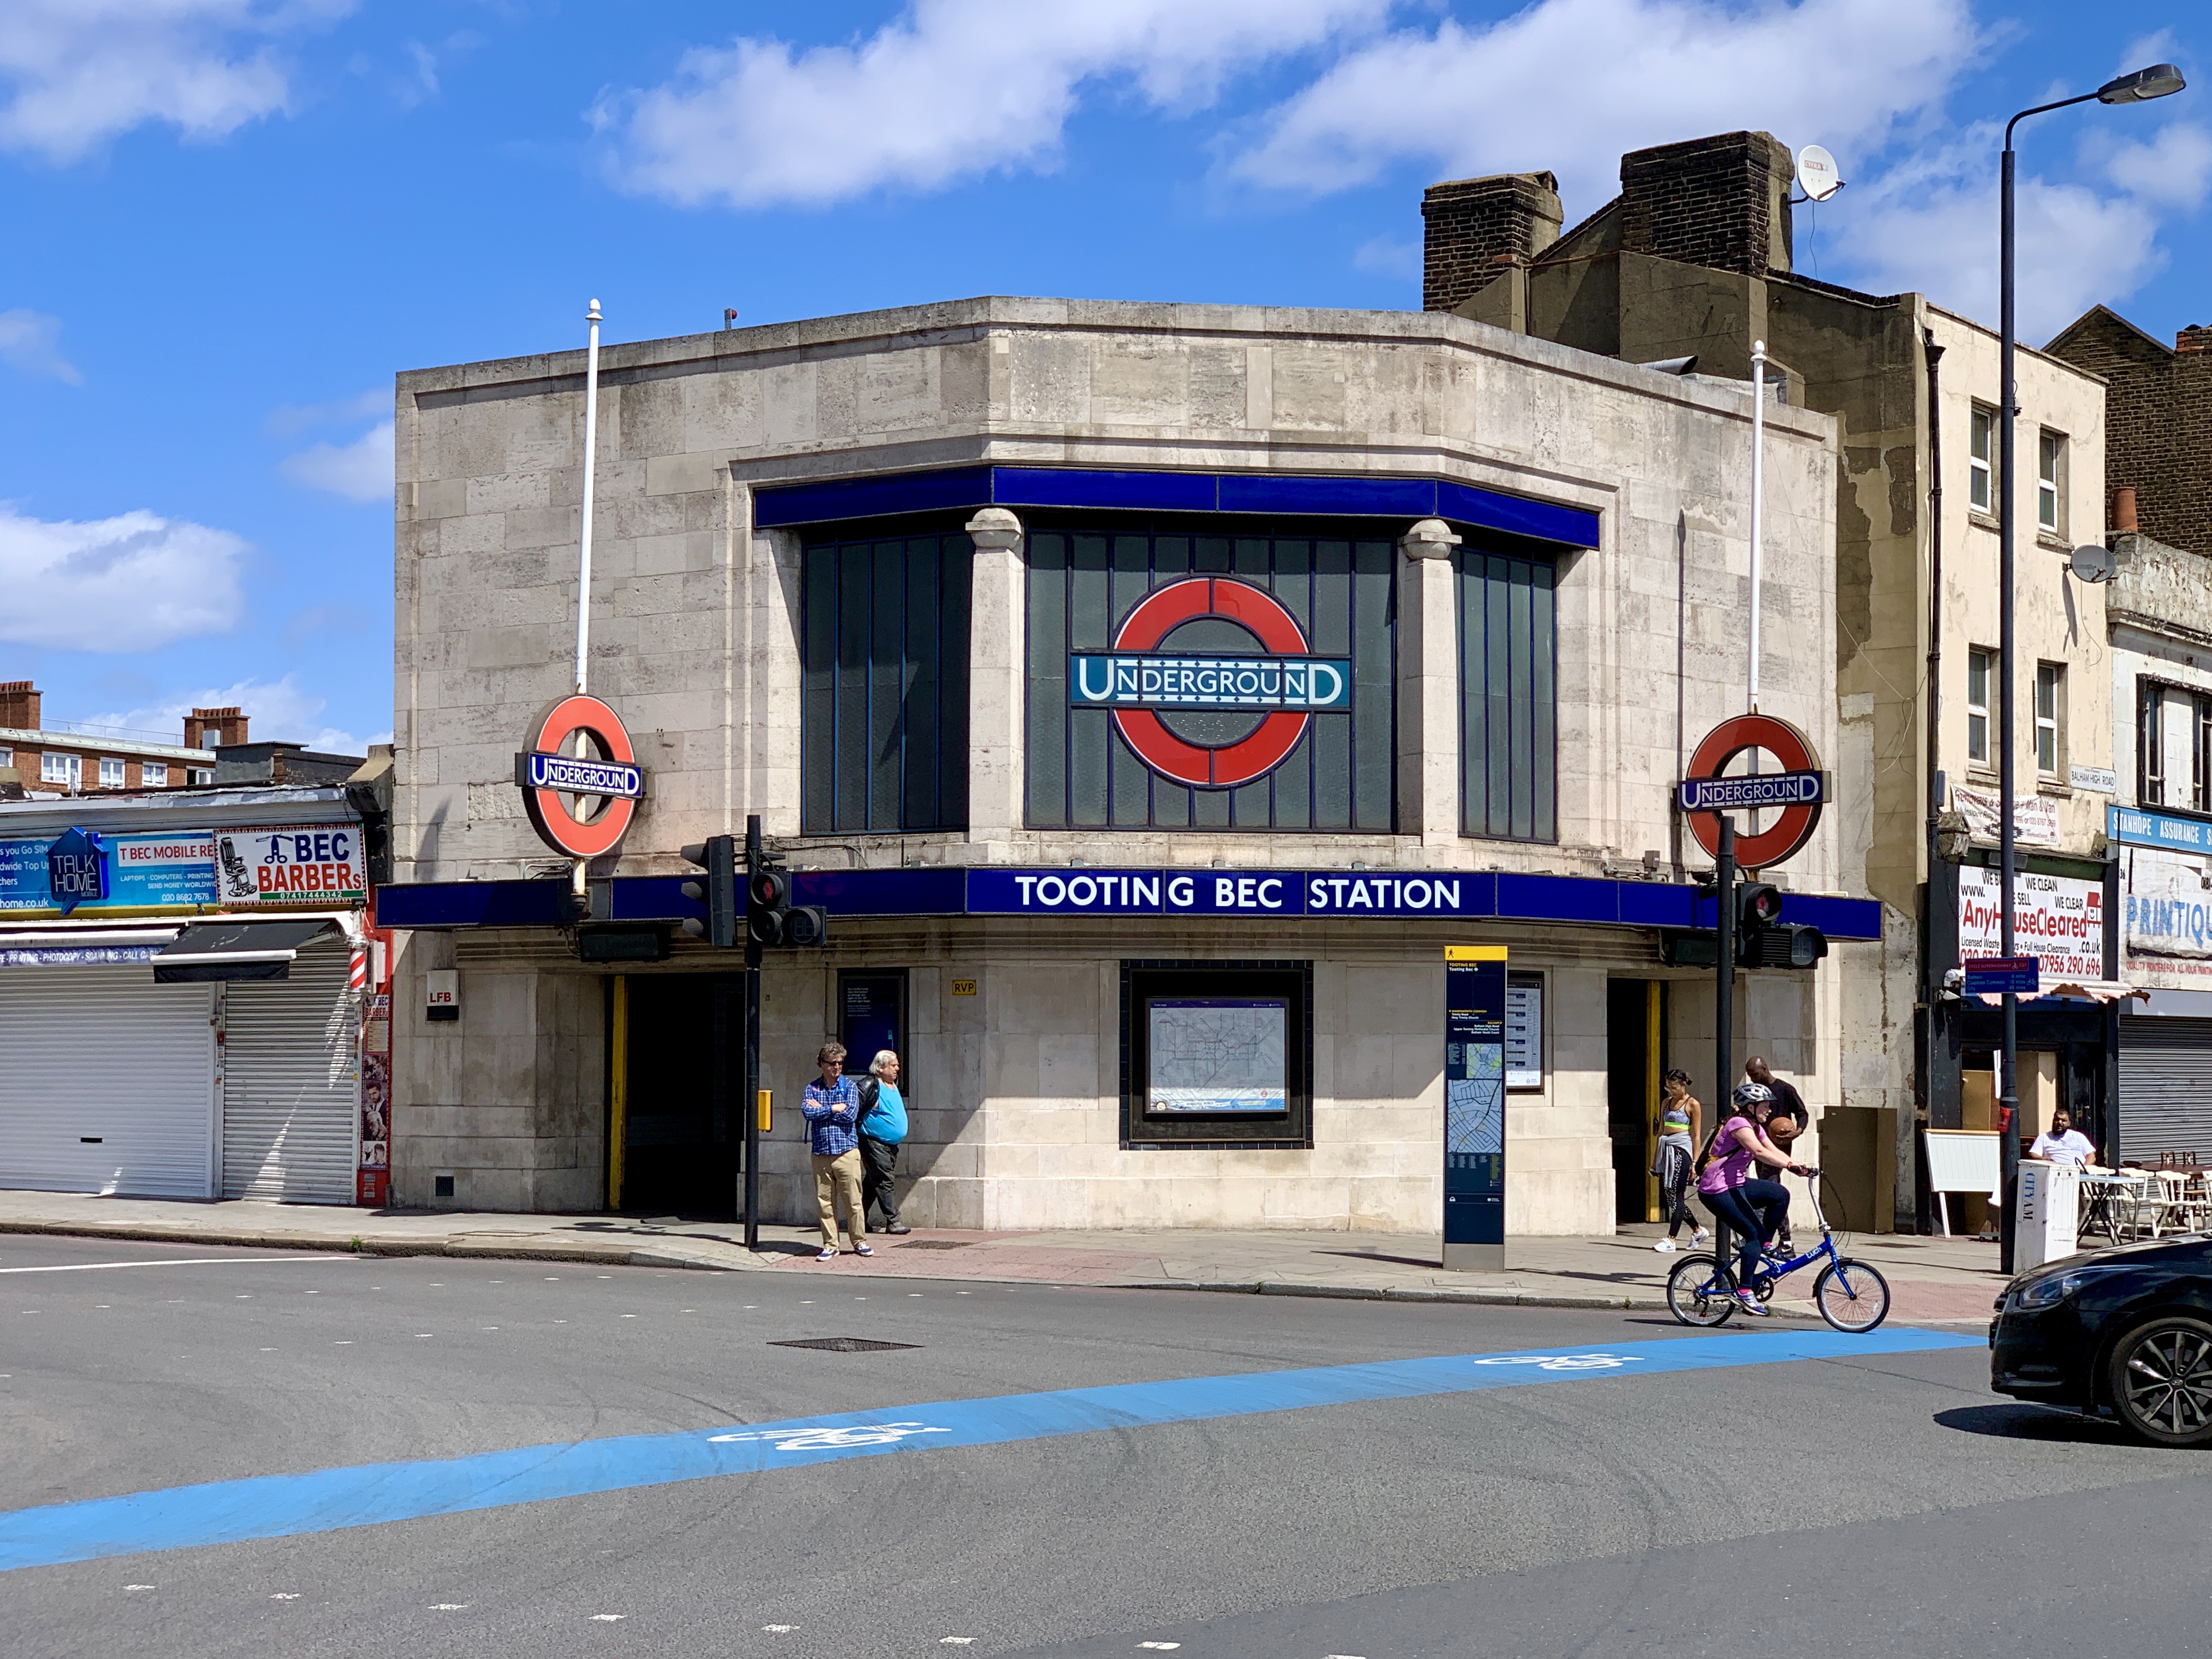 Tooting Bec tube station